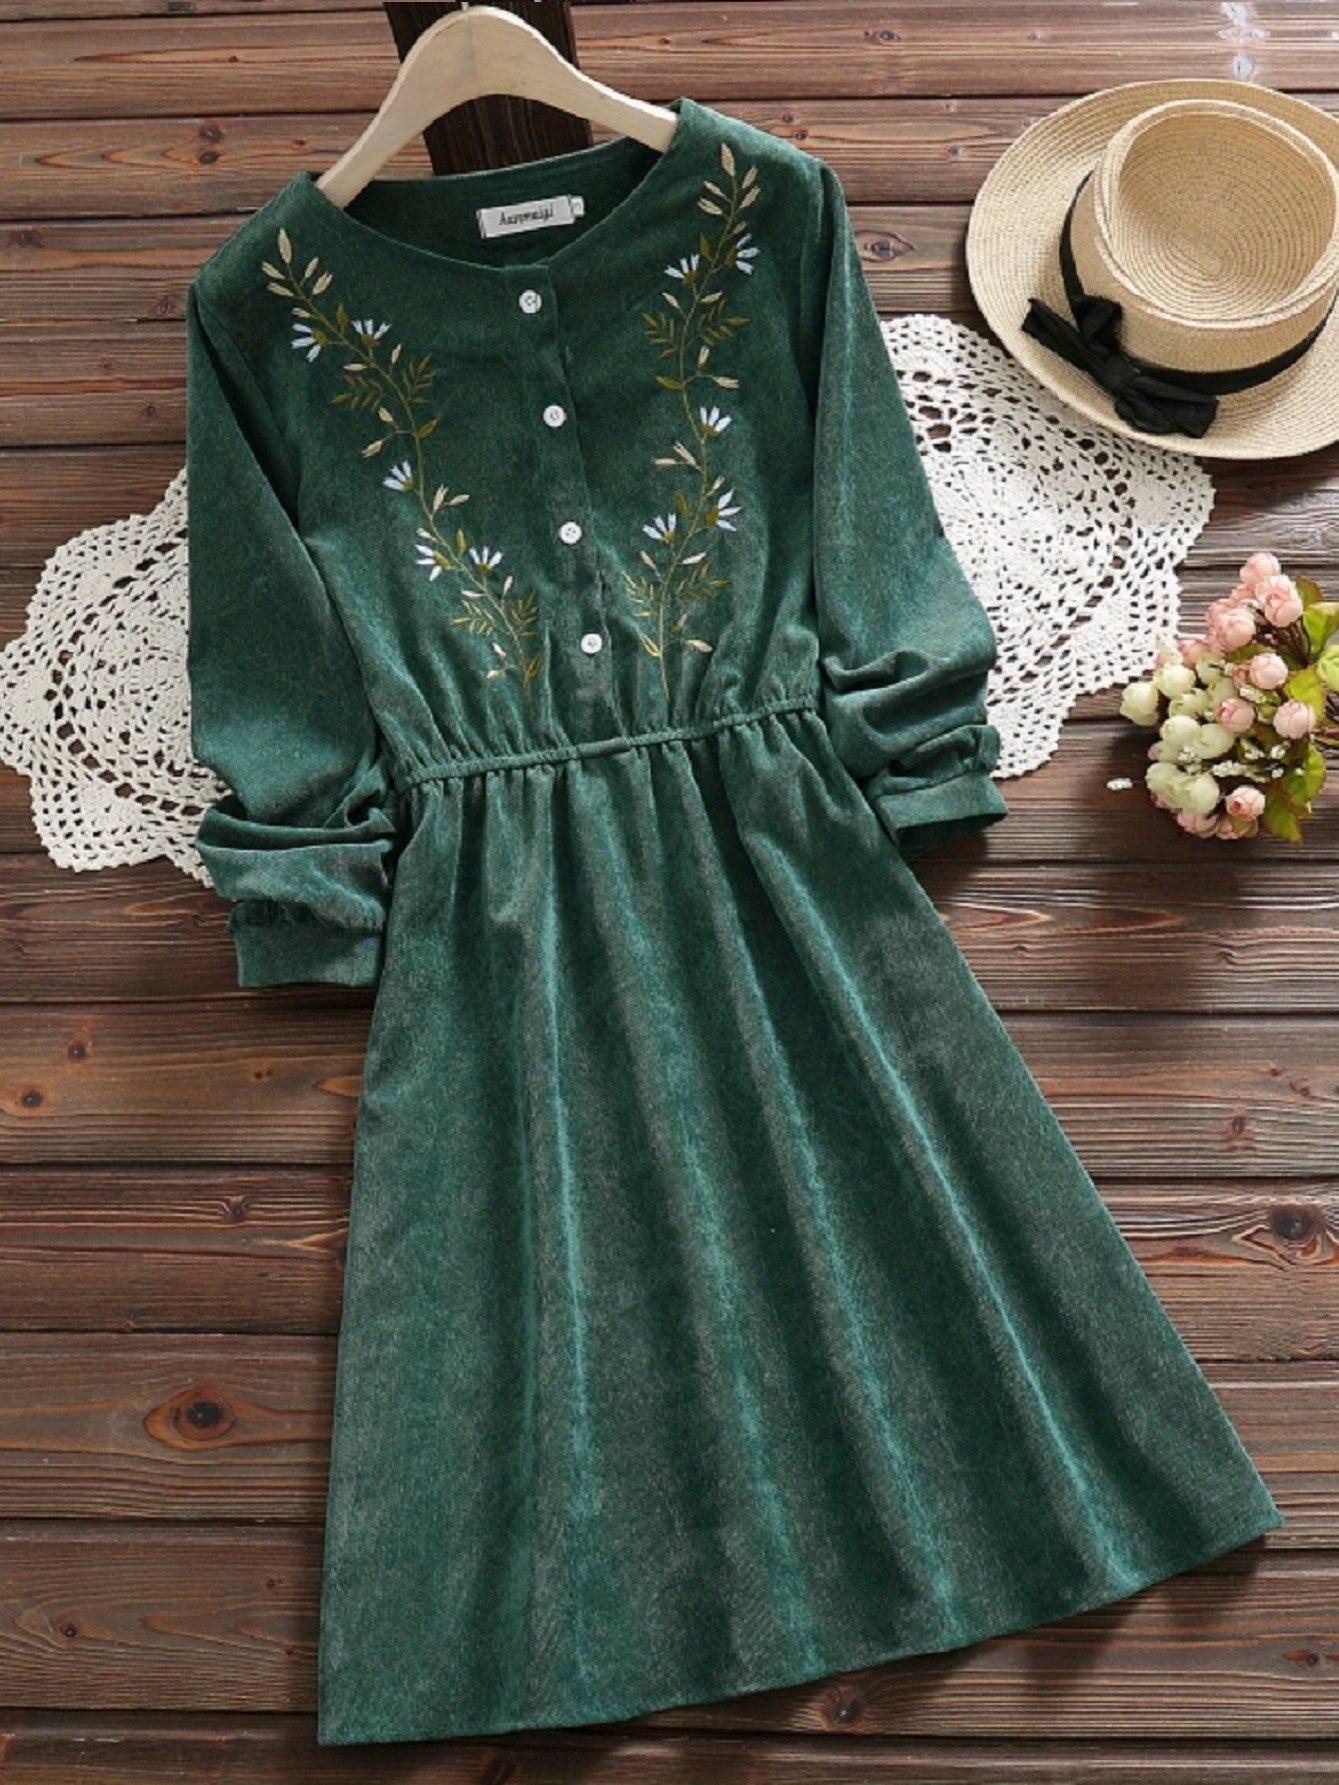 vlovelaw  Button Front Floral Embroidered Dress, Vintage Slim Waist Pleated Long Sleeve Dress, Women's Clothing